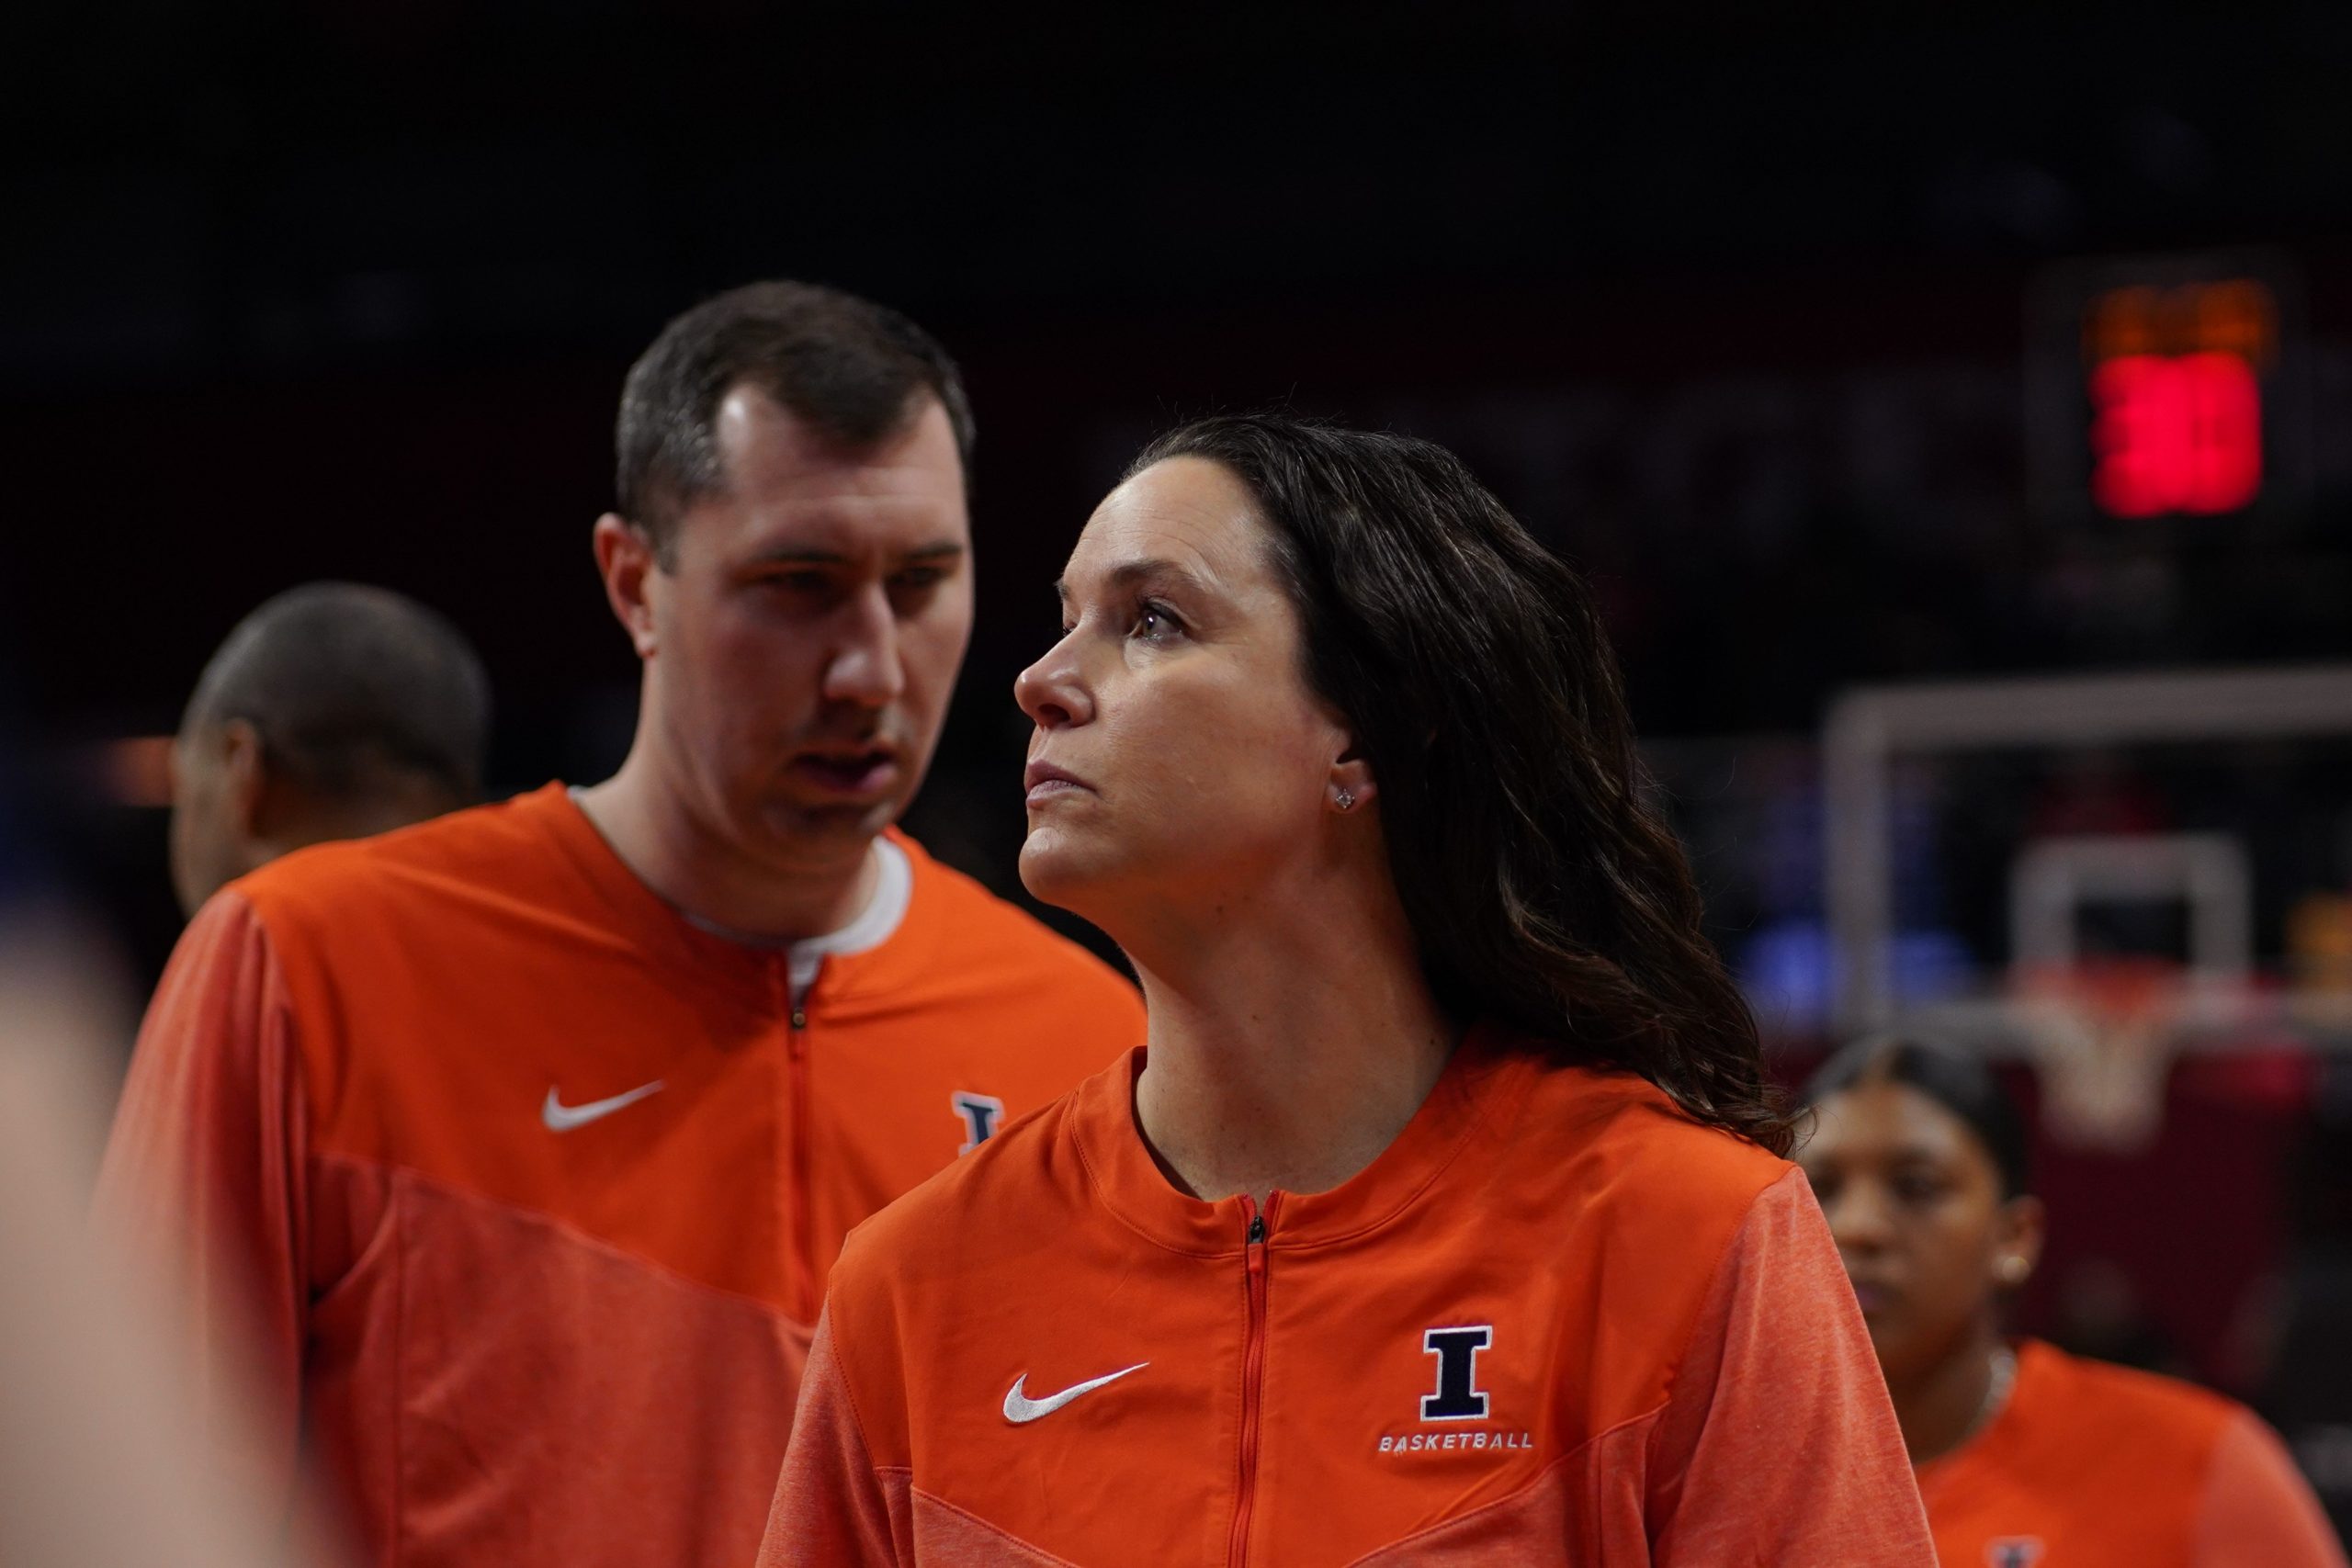 Illinois Assistant Coach Ryan Gensler Hired As Women’s Basketball Head Coach at Akron